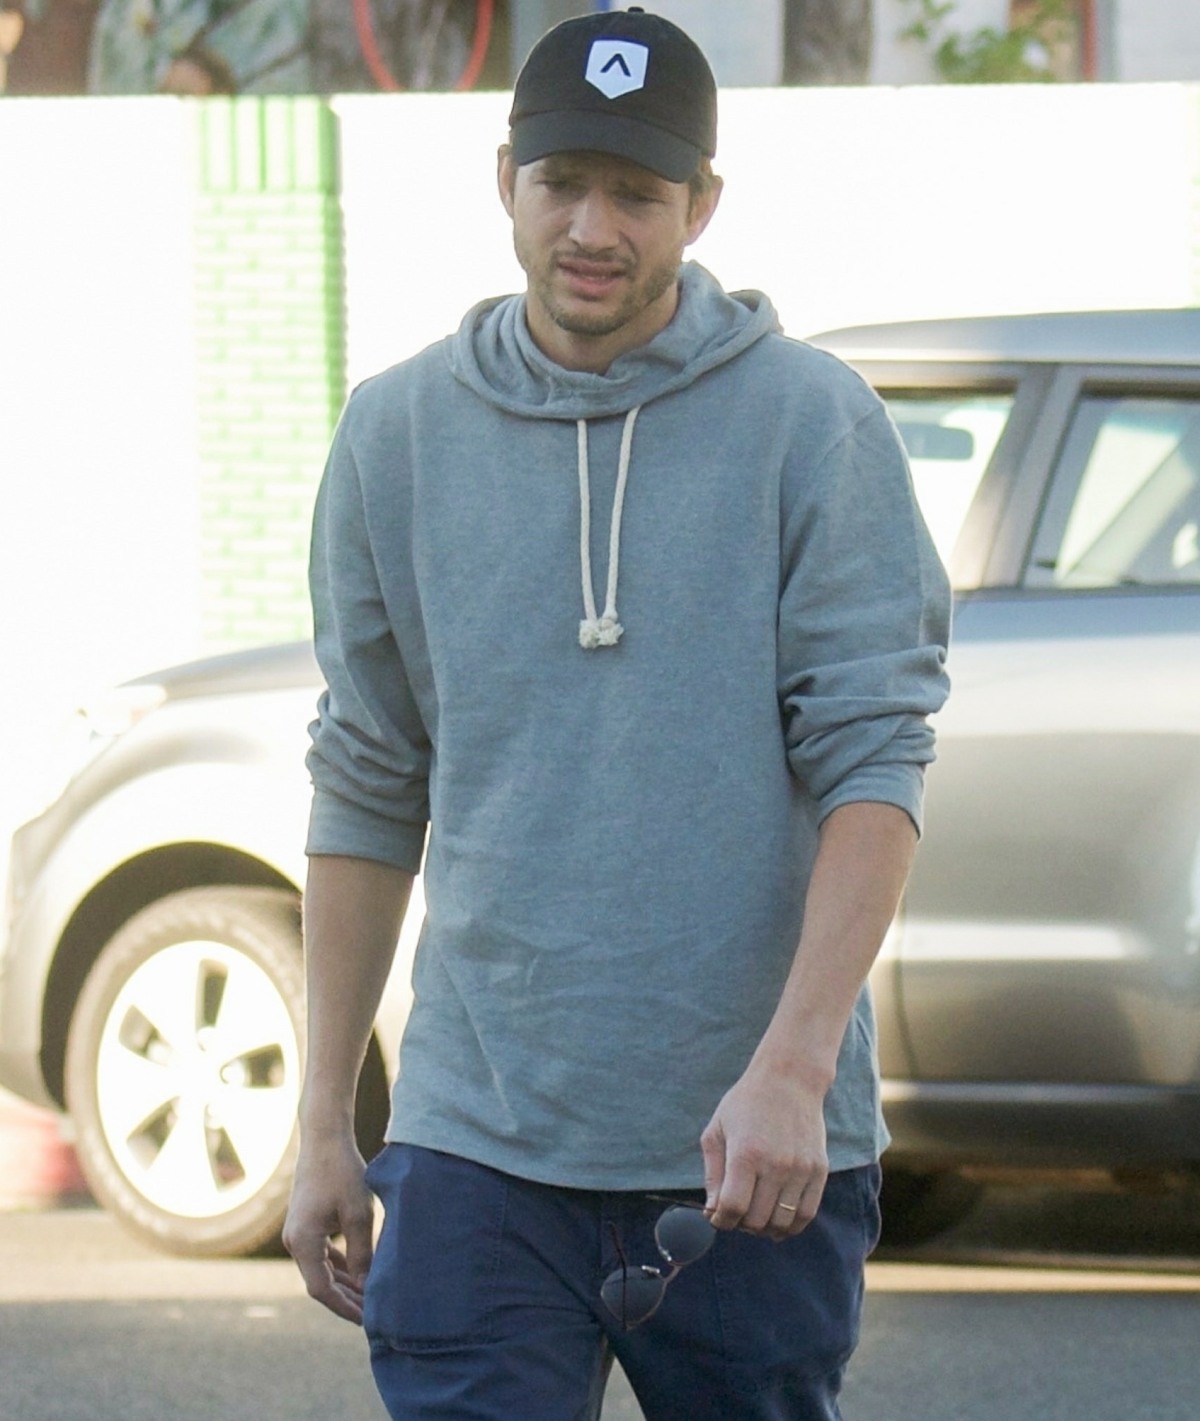 Ashton Kutcher runs errands in Los Angeles keeping it casual in a hoodie and cap